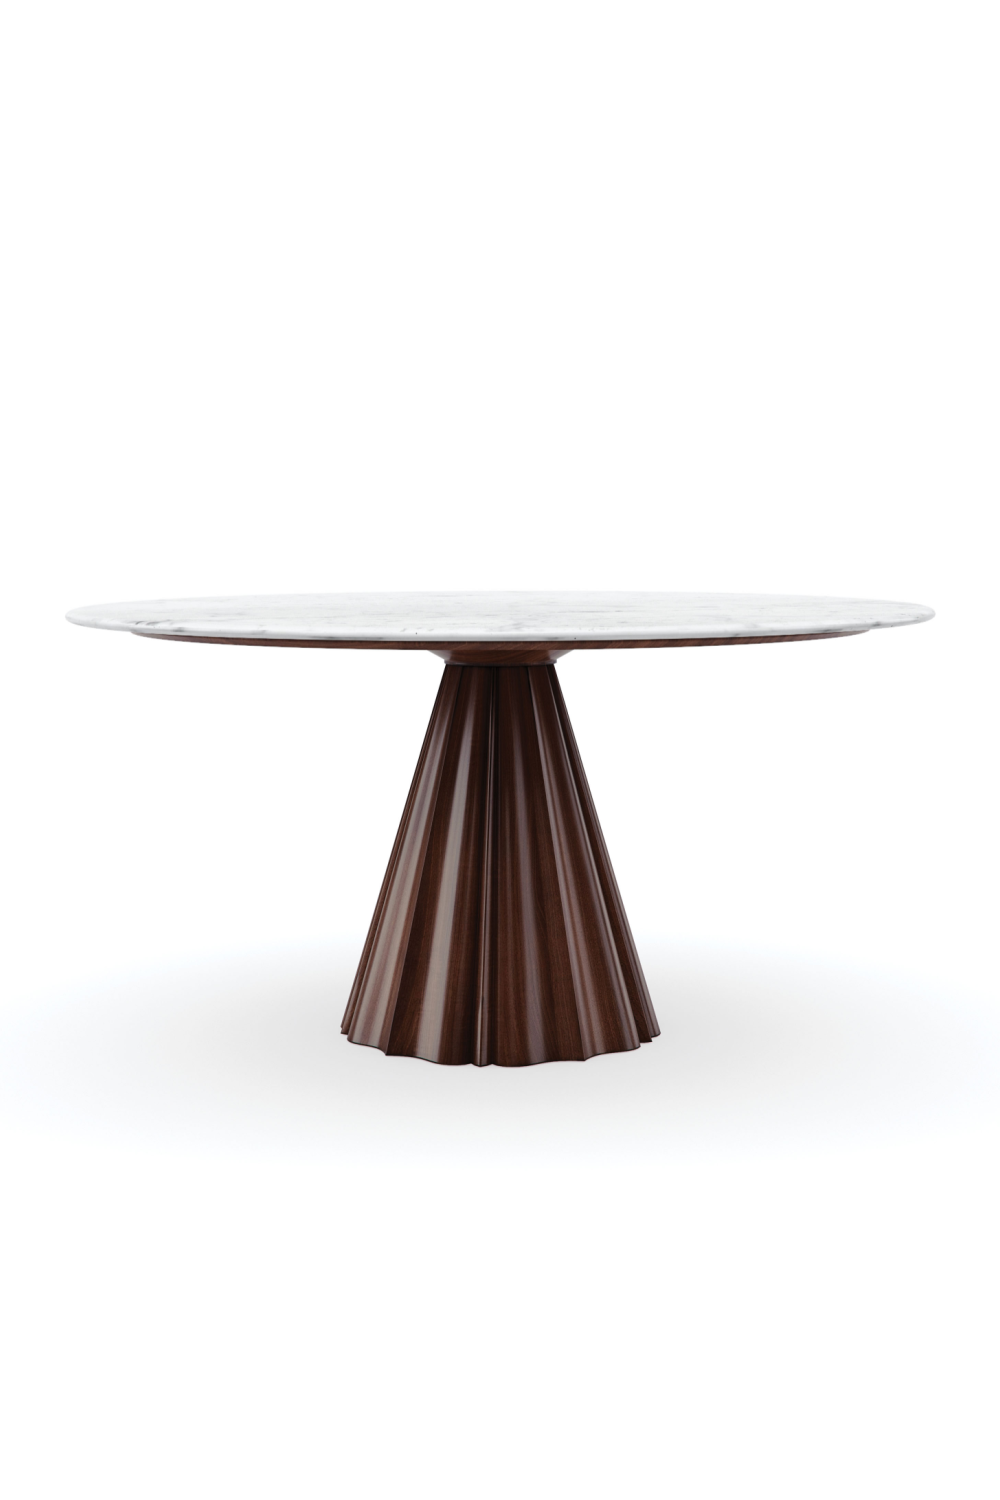 White Marble Dining Table | Caracole All Natural | Oroa.com